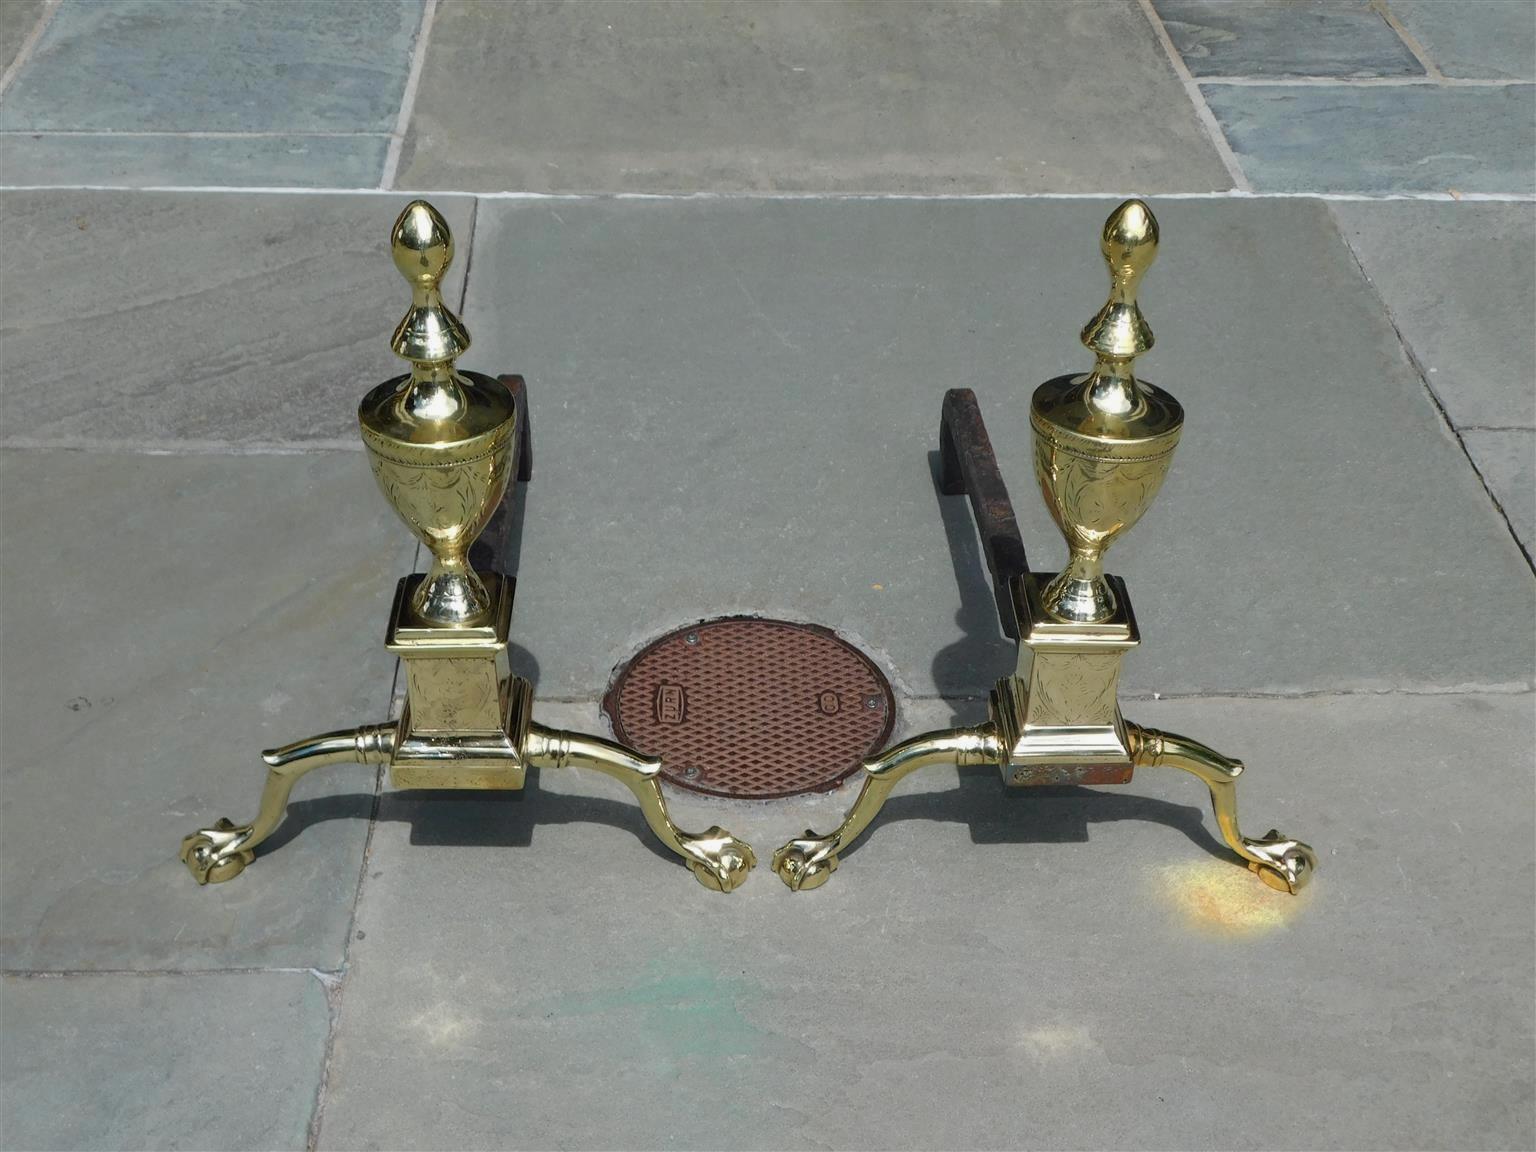 Pair of American Federal brass andirons with shield engraved urn finials, shield engraved plinths, incised checkering lines, engraved swags on skirt, and resting on banded spur legs with ball and claw feet. Philadelphia, Early 19th century.